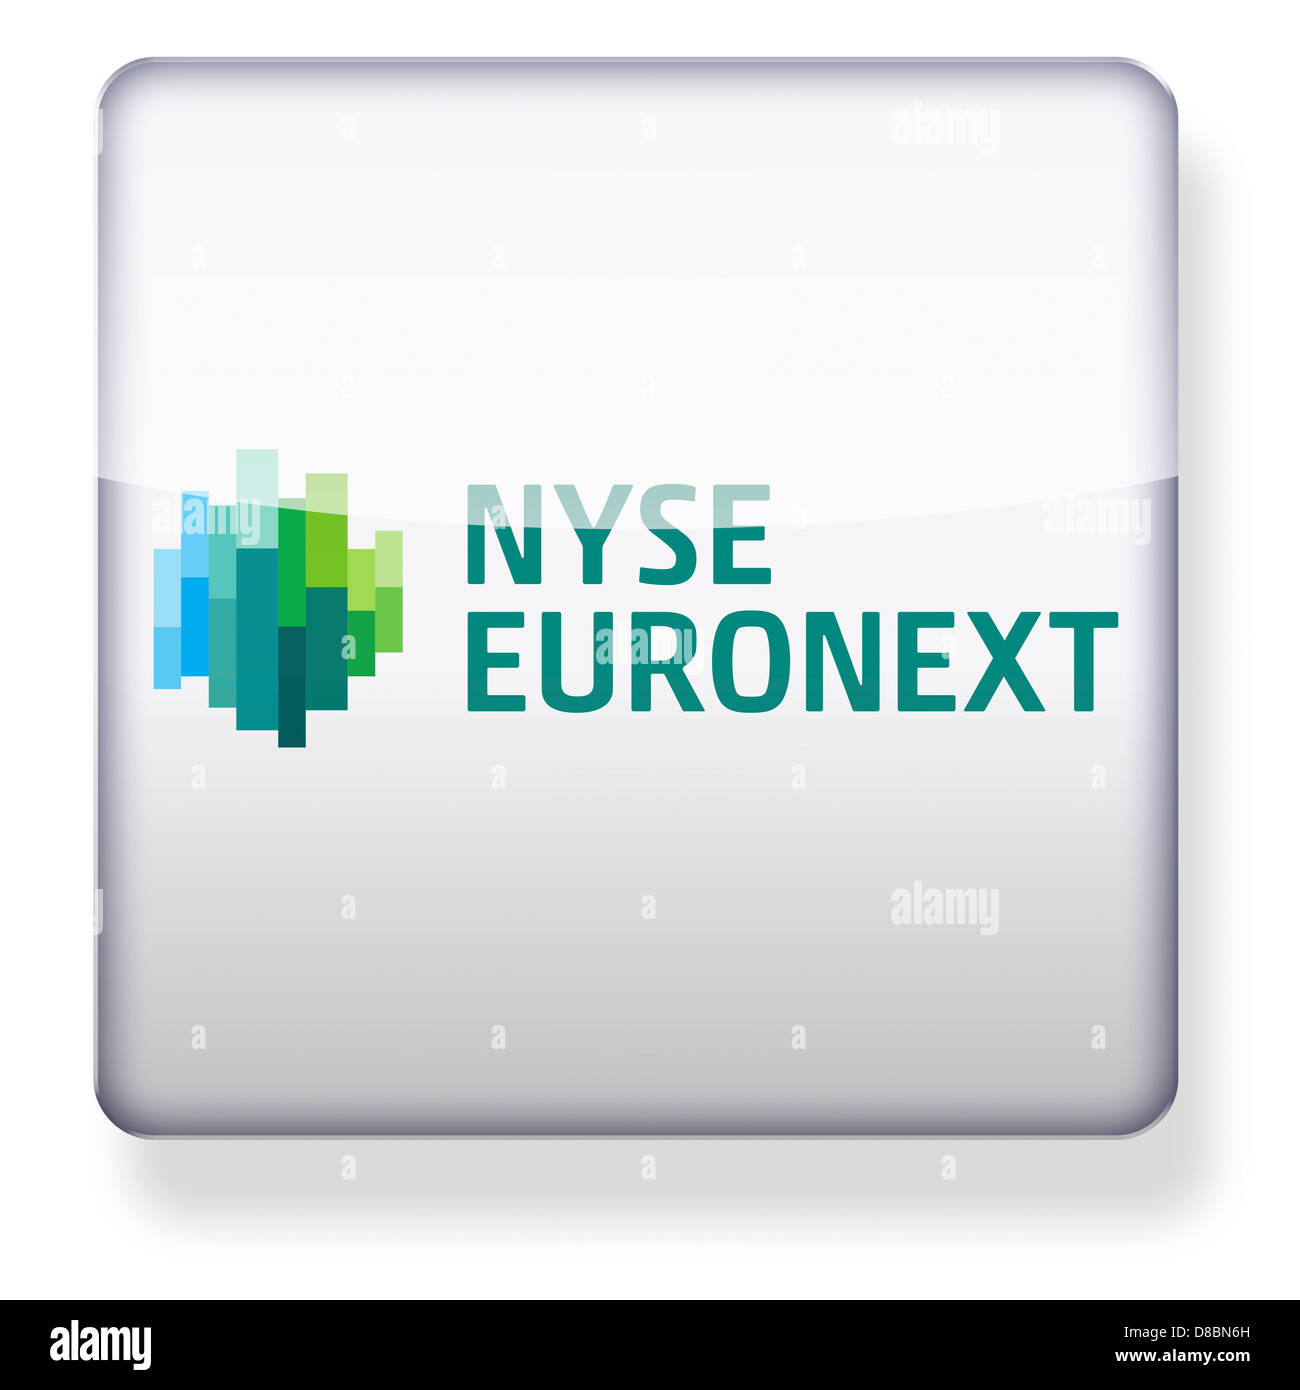 NYSE Euronext logo as an app icon. Clipping path included. Stock Photo